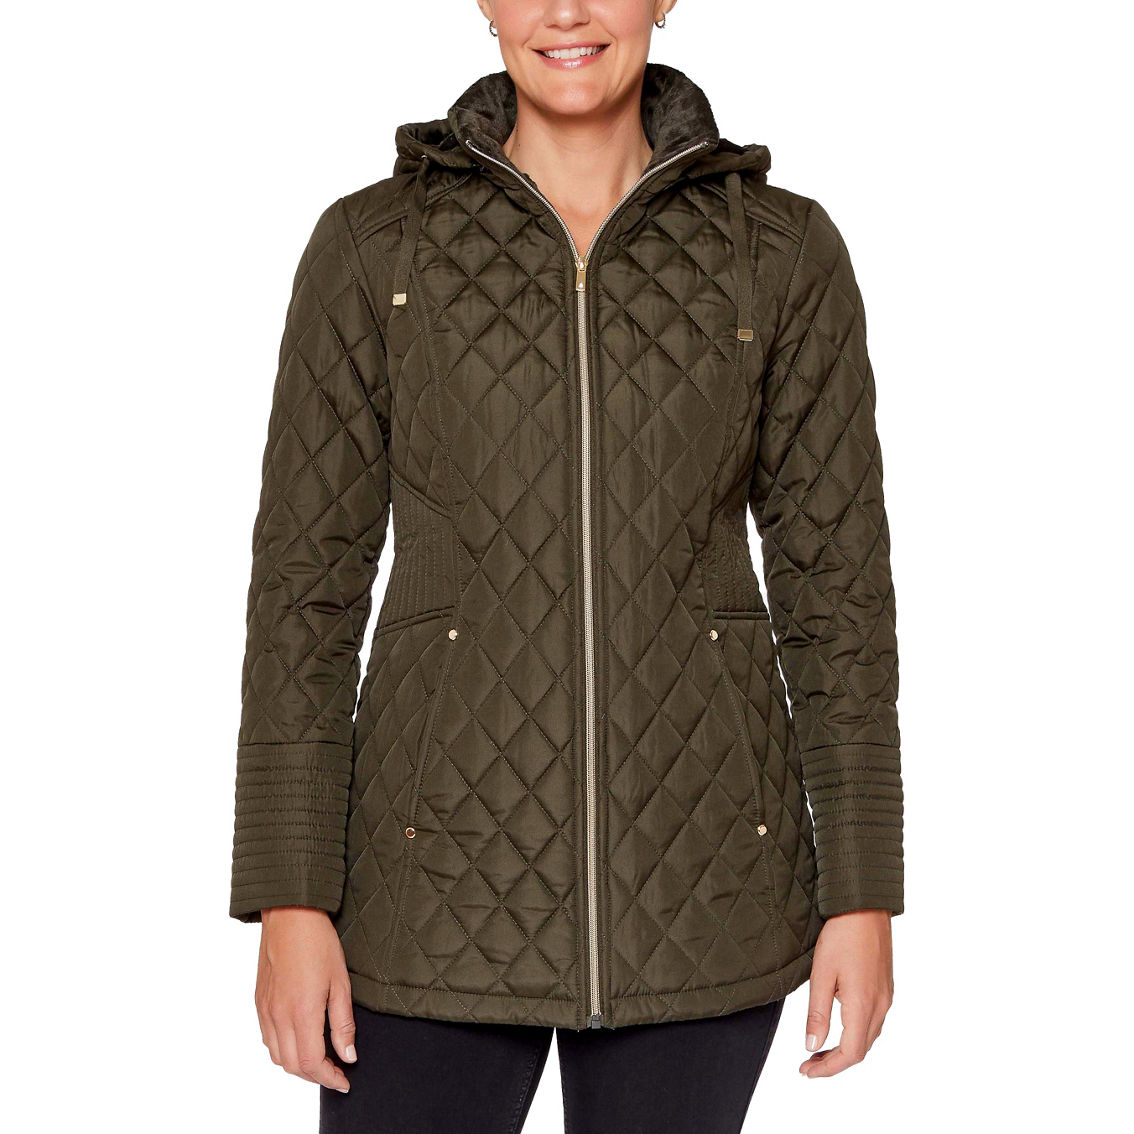 Details 31.5 In. Hooded Quilted Jacket | Coats | Clothing & Accessories ...